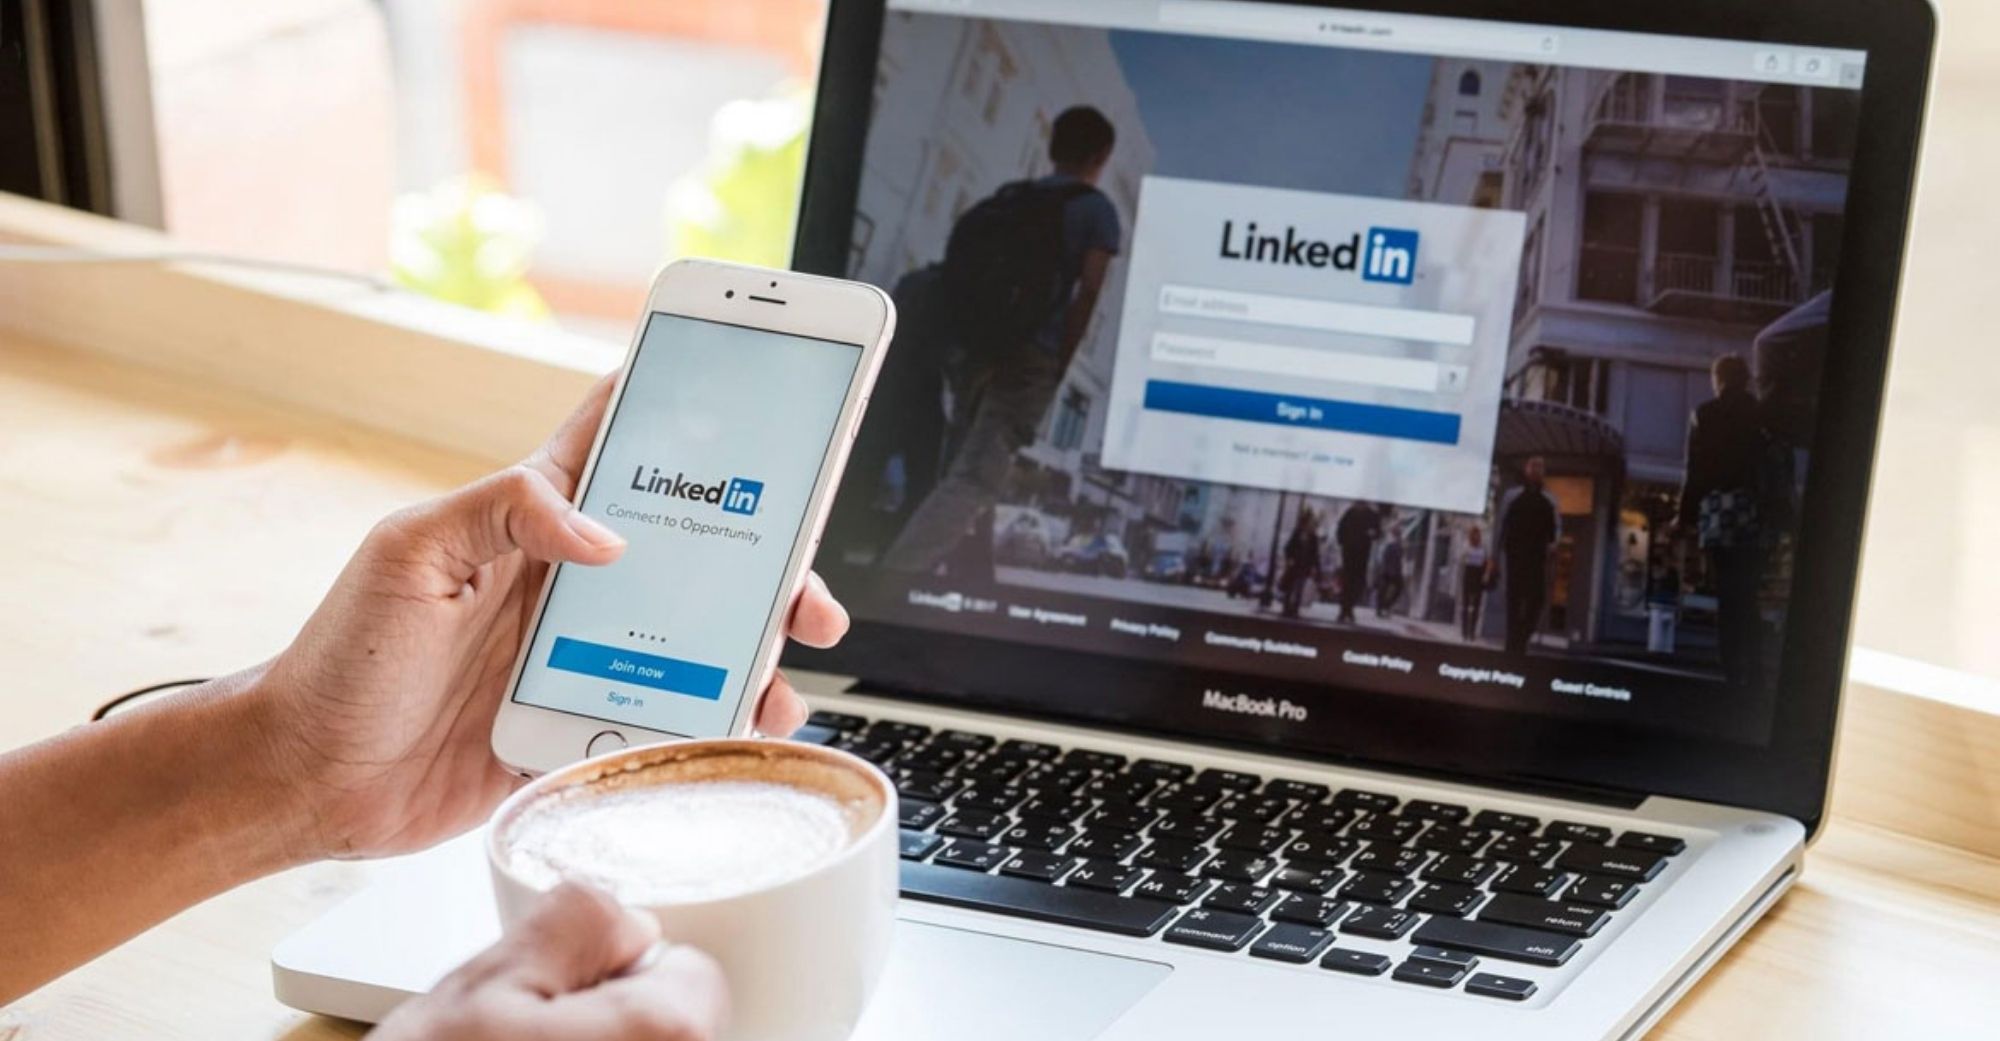 LinkedIn to Close Local Jobs App in China on Aug 9